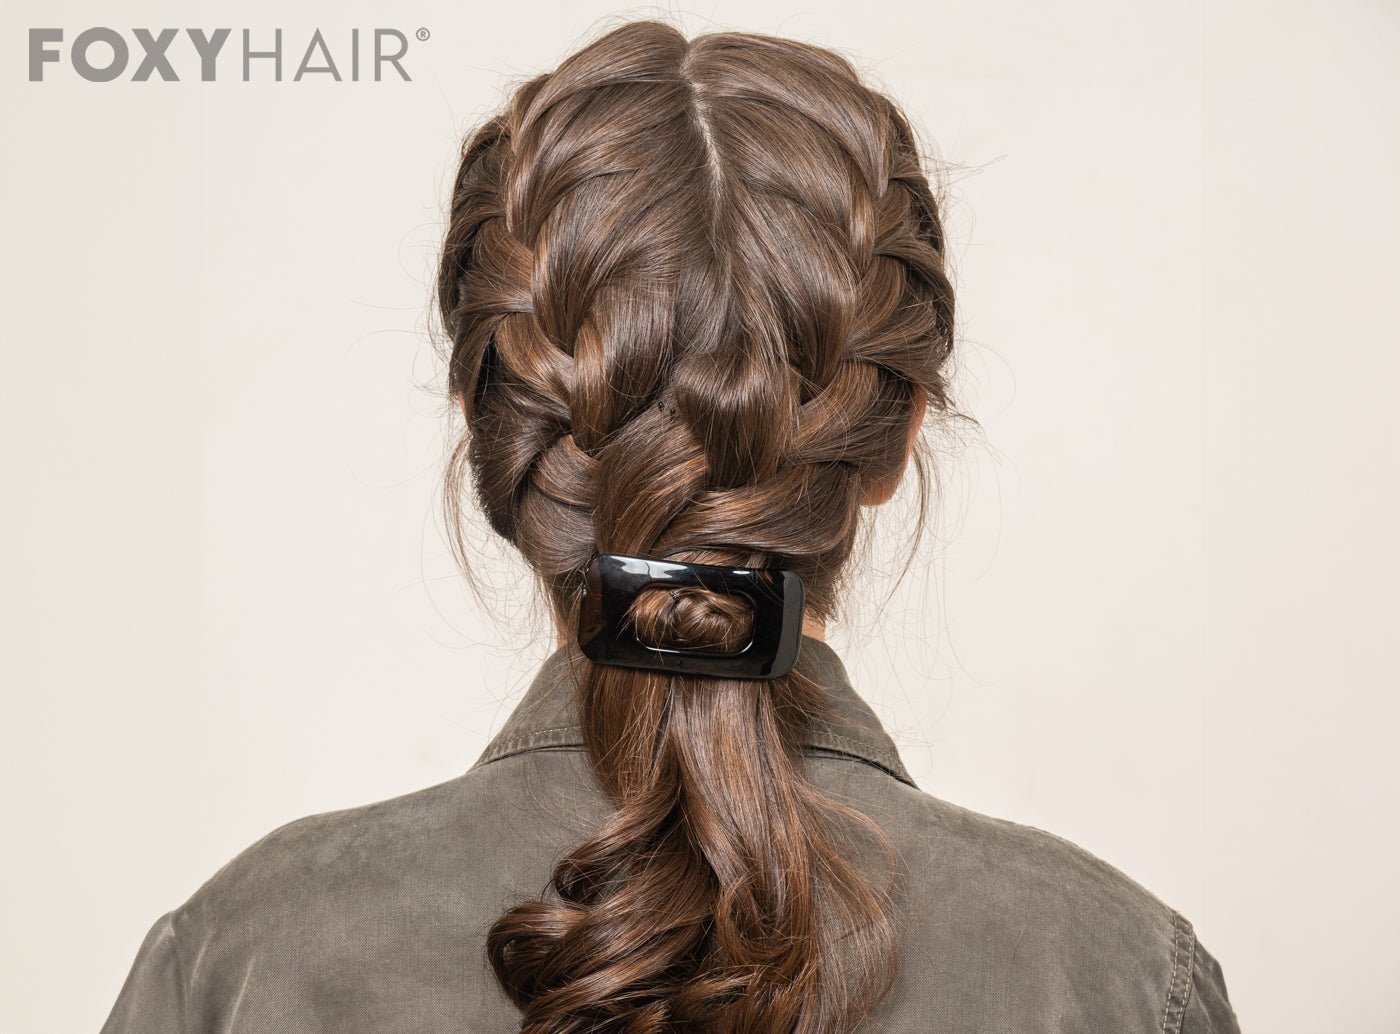 Woman with elegantly concealed extensions in braided hairstyles